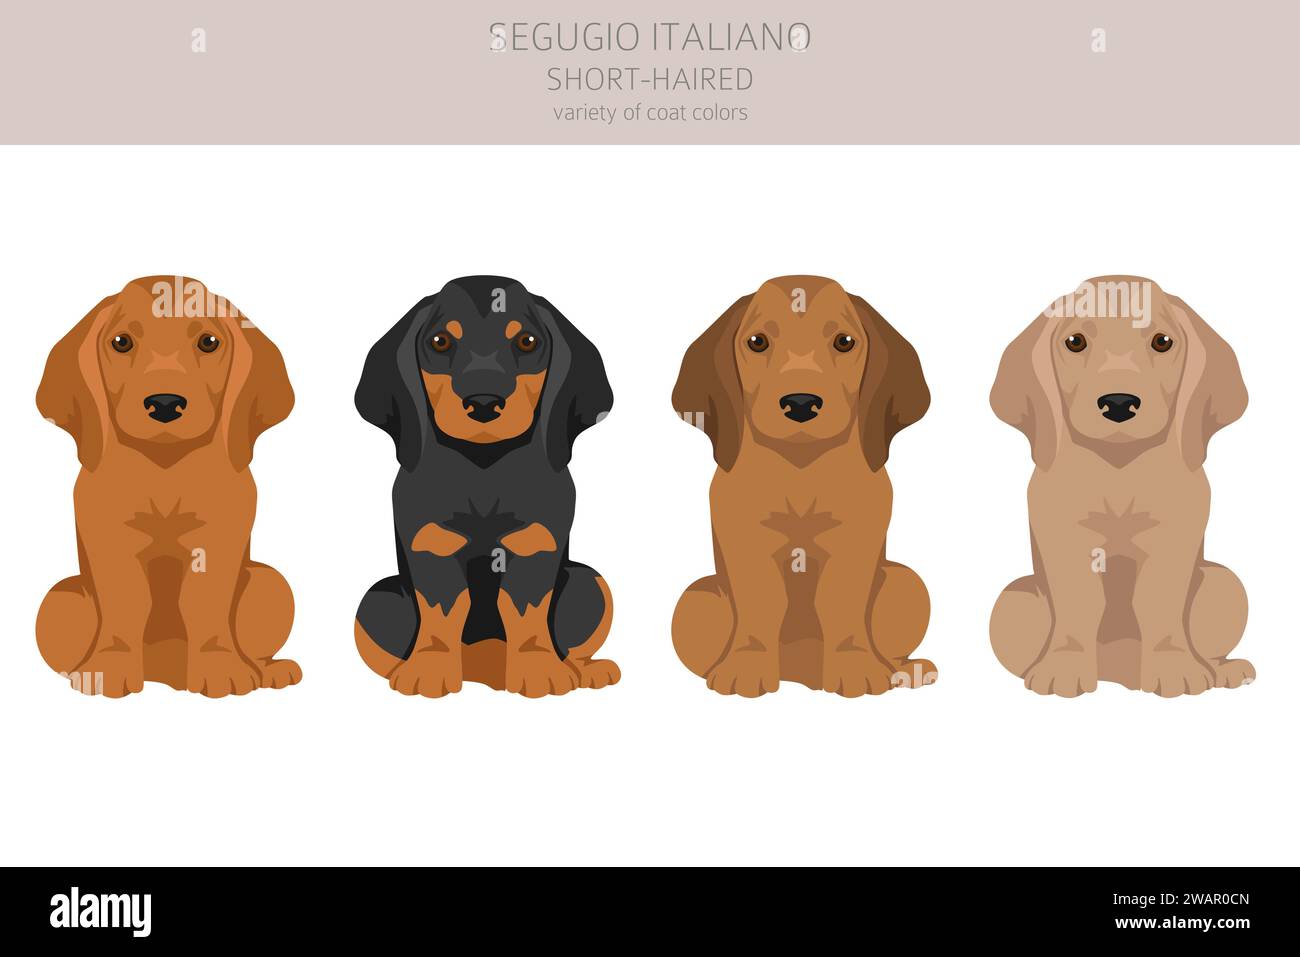 Segugio Italiano short haired puppies clipart. Different poses, coat colors set.  Vector illustration Stock Vector